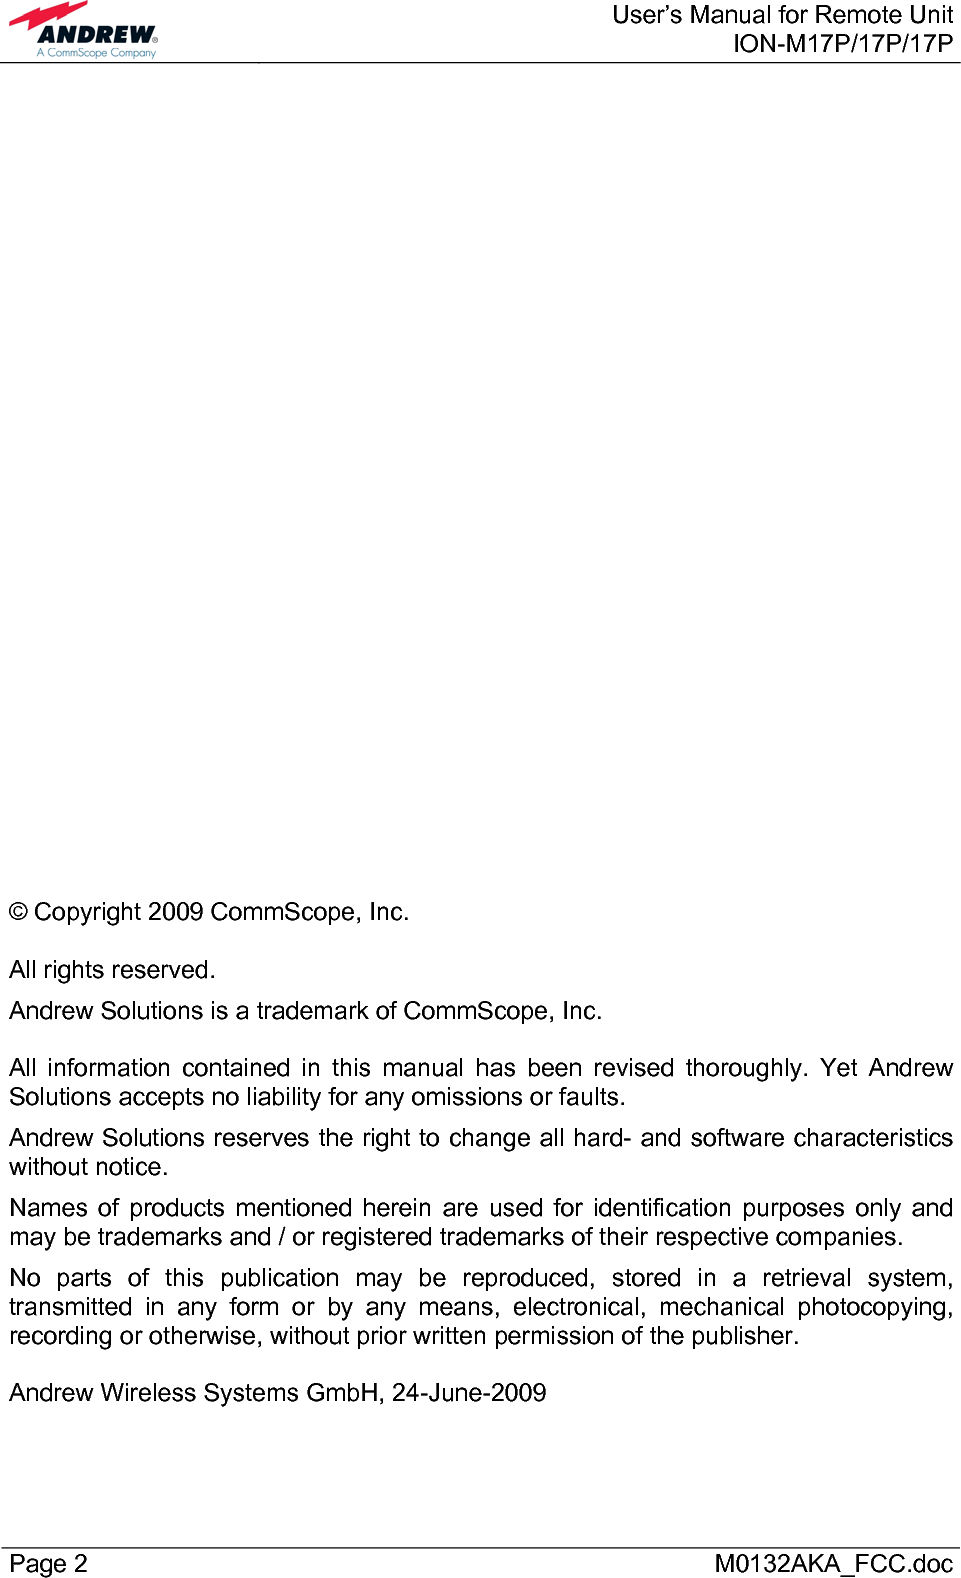  User’s Manual for Remote UnitION-M17P/17P/17P Page 2      M0132AKA_FCC.doc                             © Copyright 2009 CommScope, Inc.  All rights reserved. Andrew Solutions is a trademark of CommScope, Inc.  All information contained in this manual has been revised thoroughly. Yet Andrew Solutions accepts no liability for any omissions or faults. Andrew Solutions reserves the right to change all hard- and software characteristics without notice. Names of products mentioned herein are used for identification purposes only and may be trademarks and / or registered trademarks of their respective companies. No parts of this publication may be reproduced, stored in a retrieval system, transmitted in any form or by any means, electronical, mechanical photocopying, recording or otherwise, without prior written permission of the publisher.  Andrew Wireless Systems GmbH, 24-June-2009  